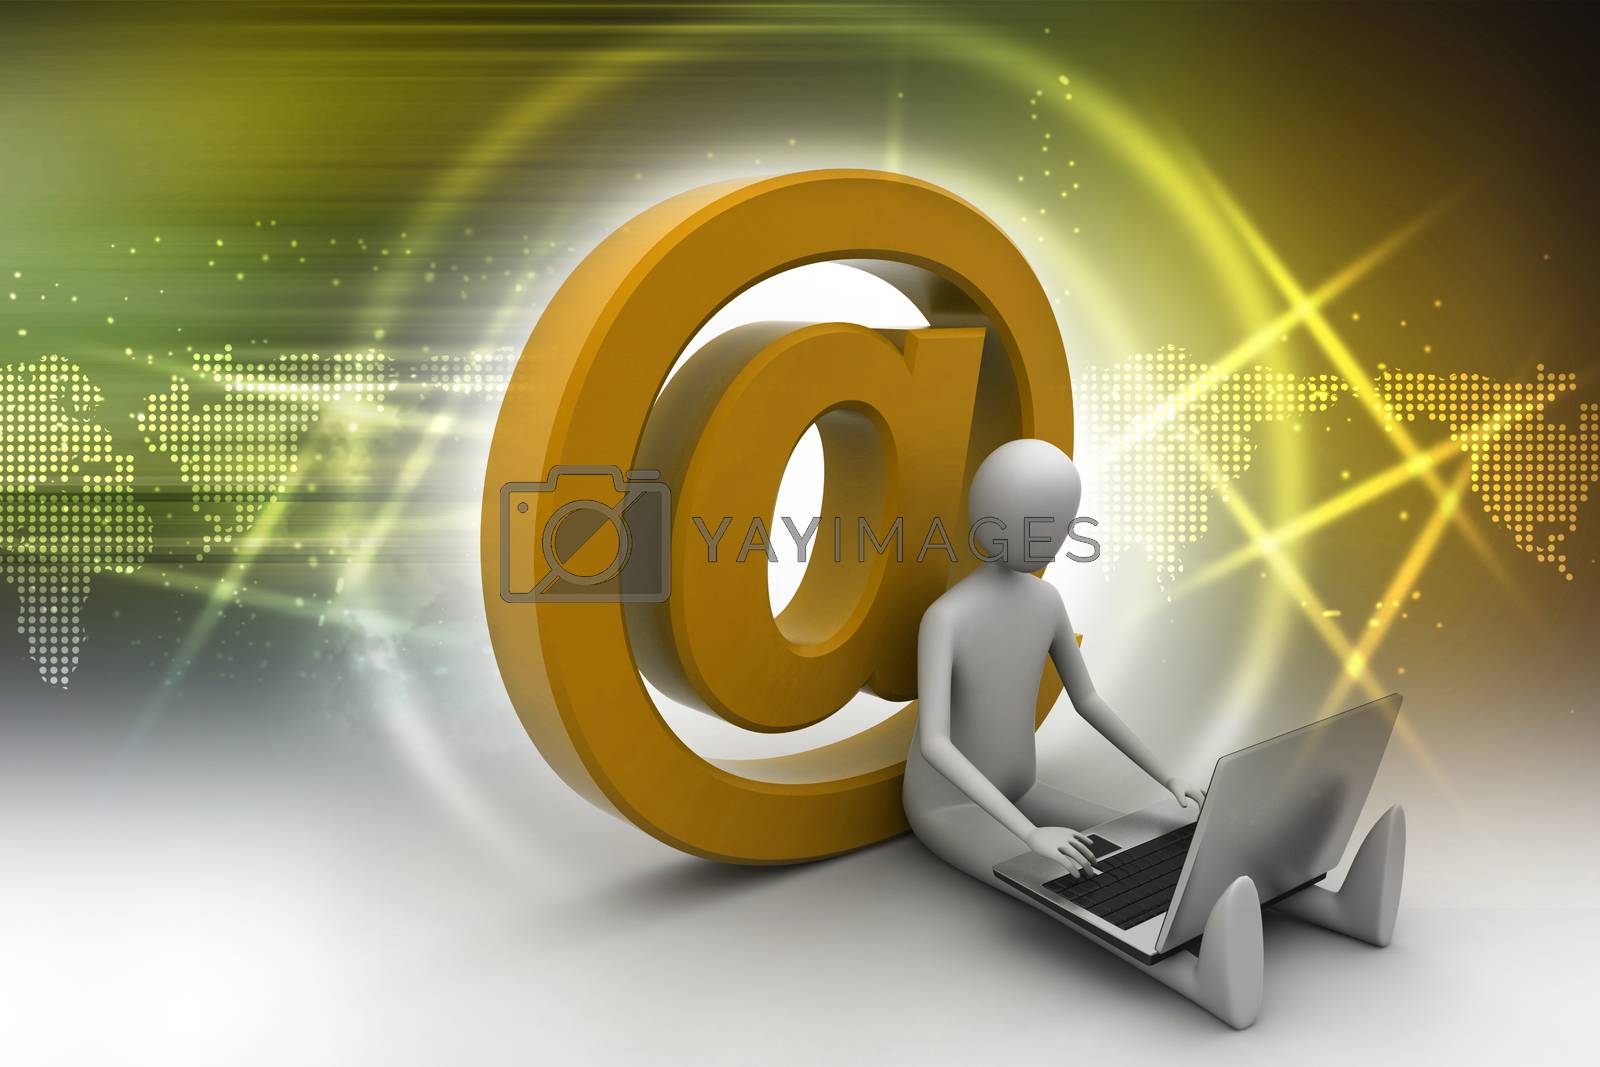 Royalty free image of man with laptop sitting on the email icon by cuteimage